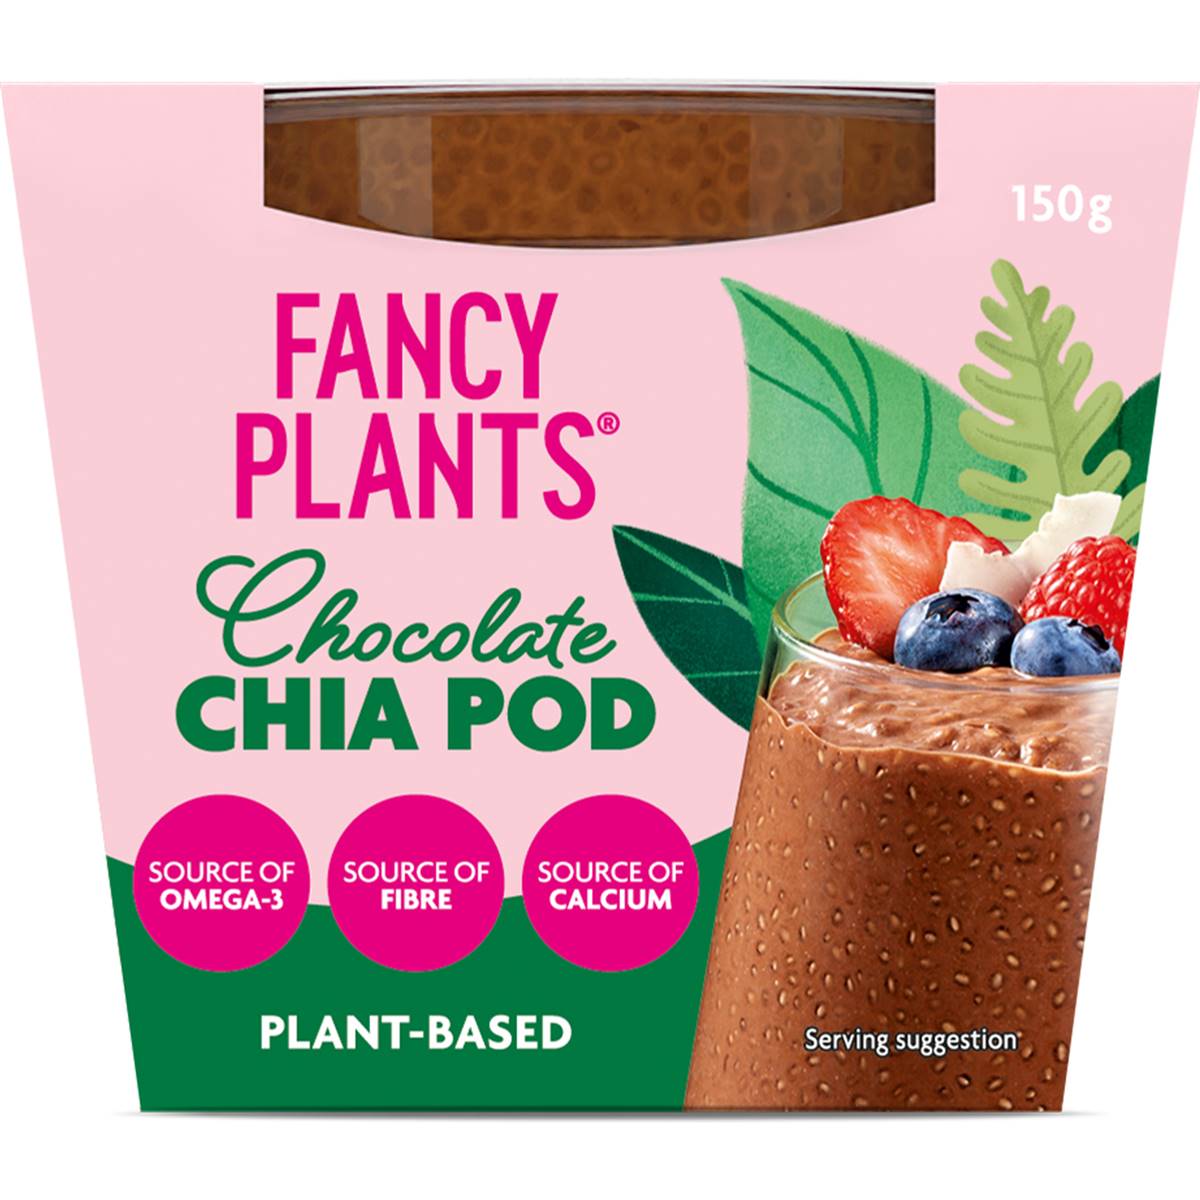 Calories in Fancy Plants Plant Based Chocolate Chia Pod